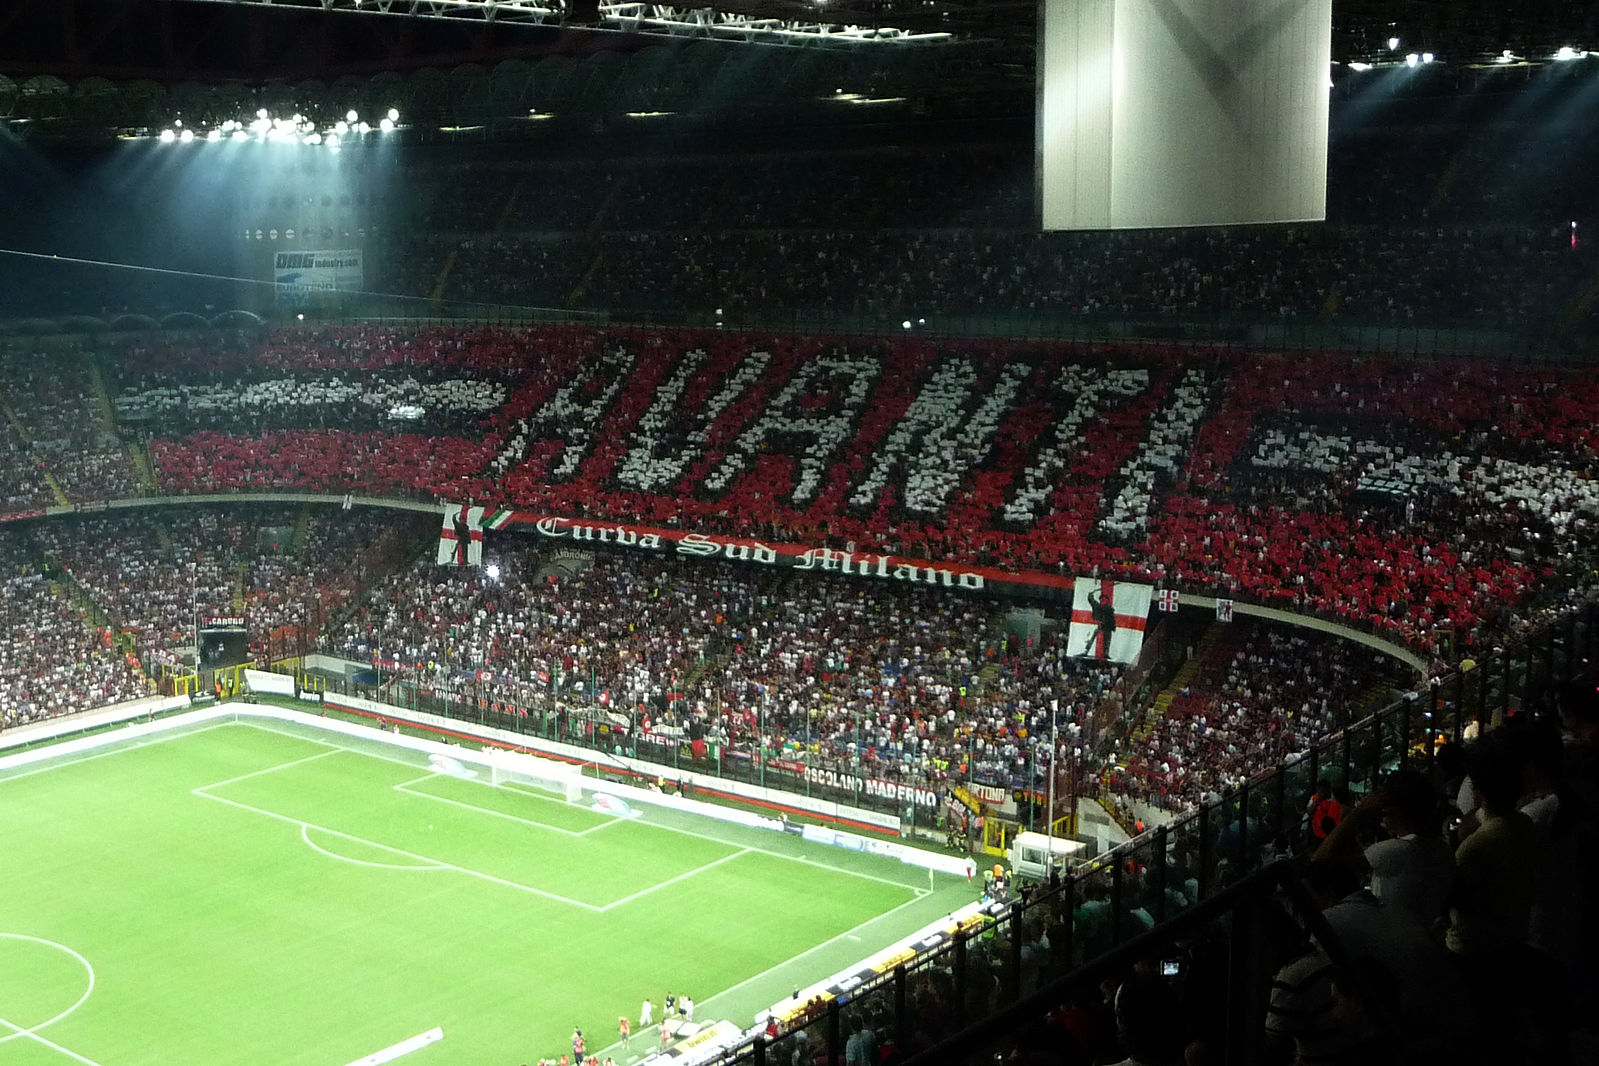 The San Siro is officially sold out for the first leg, meaning the iconic stadium will be graced to its full capacity by Milan fans ahead of the second leg.